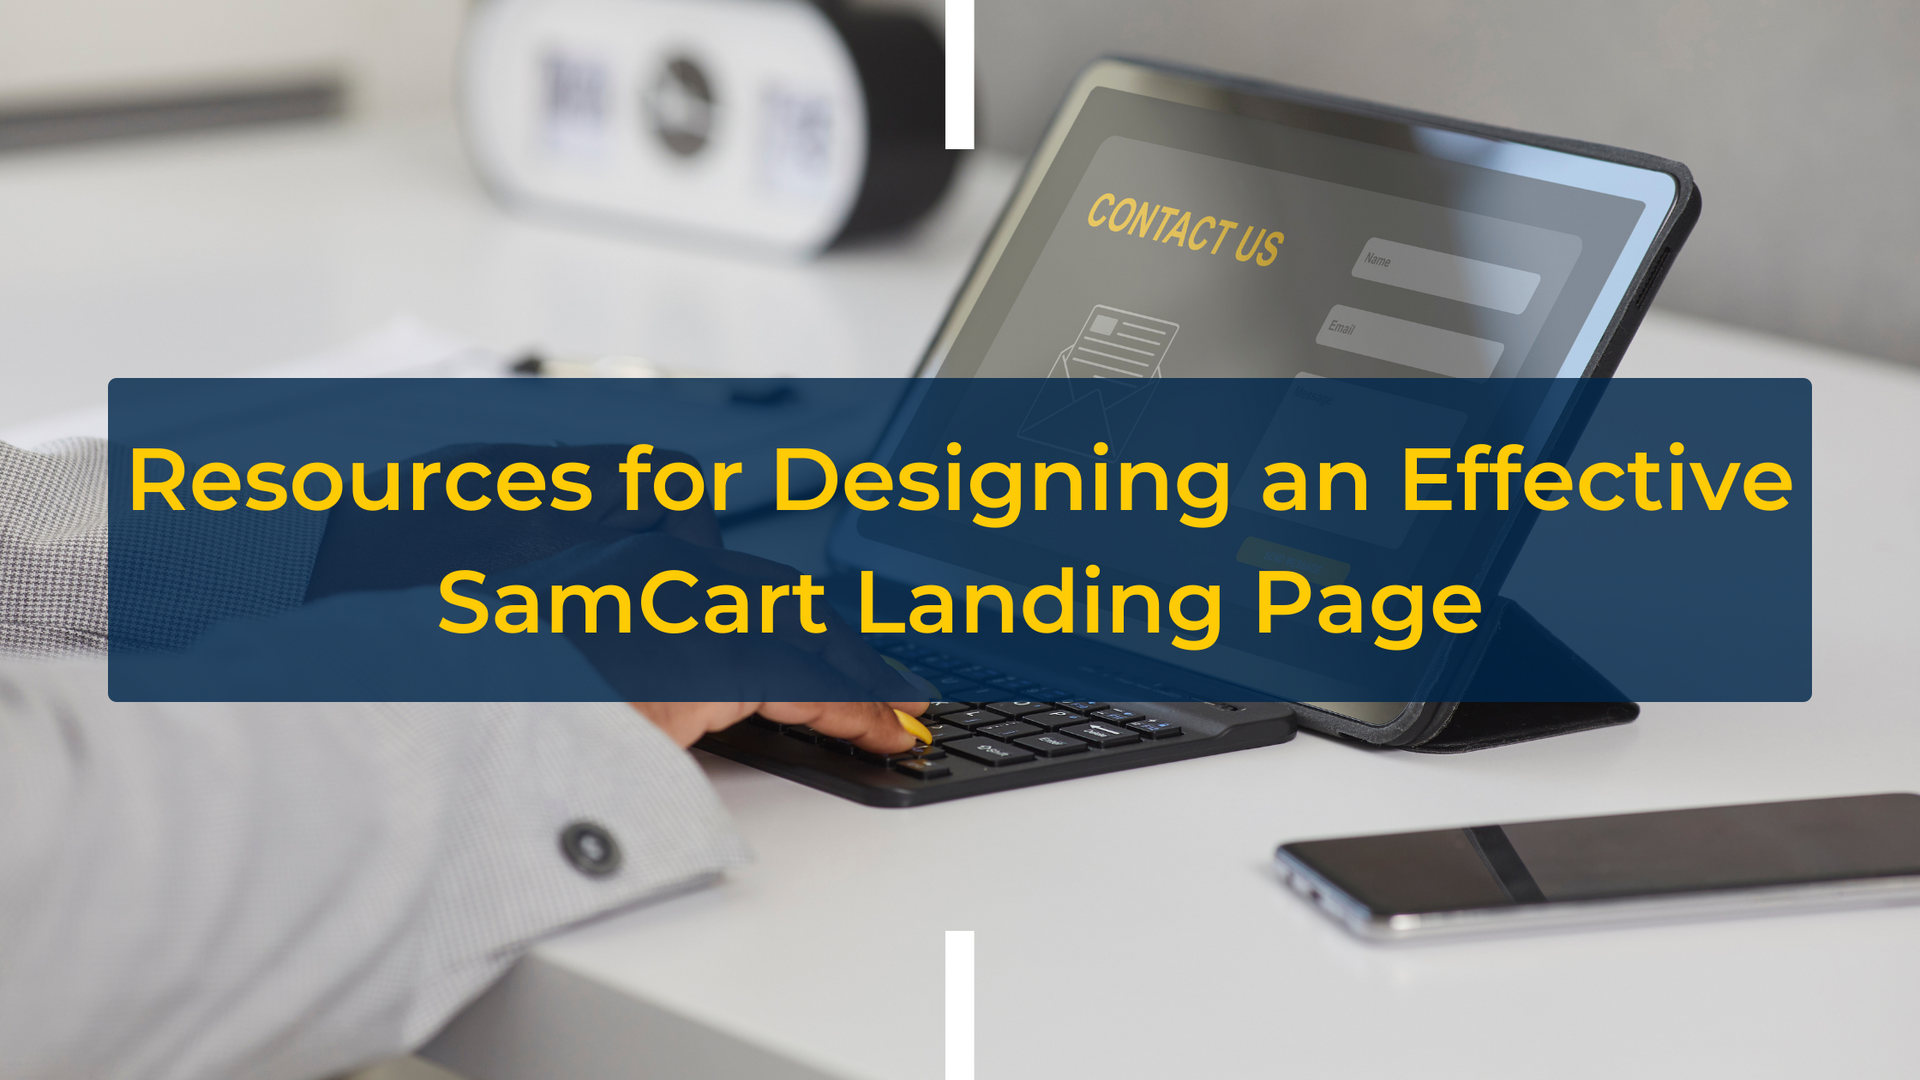 Resources for Designing an Effective SamCart Landing Page